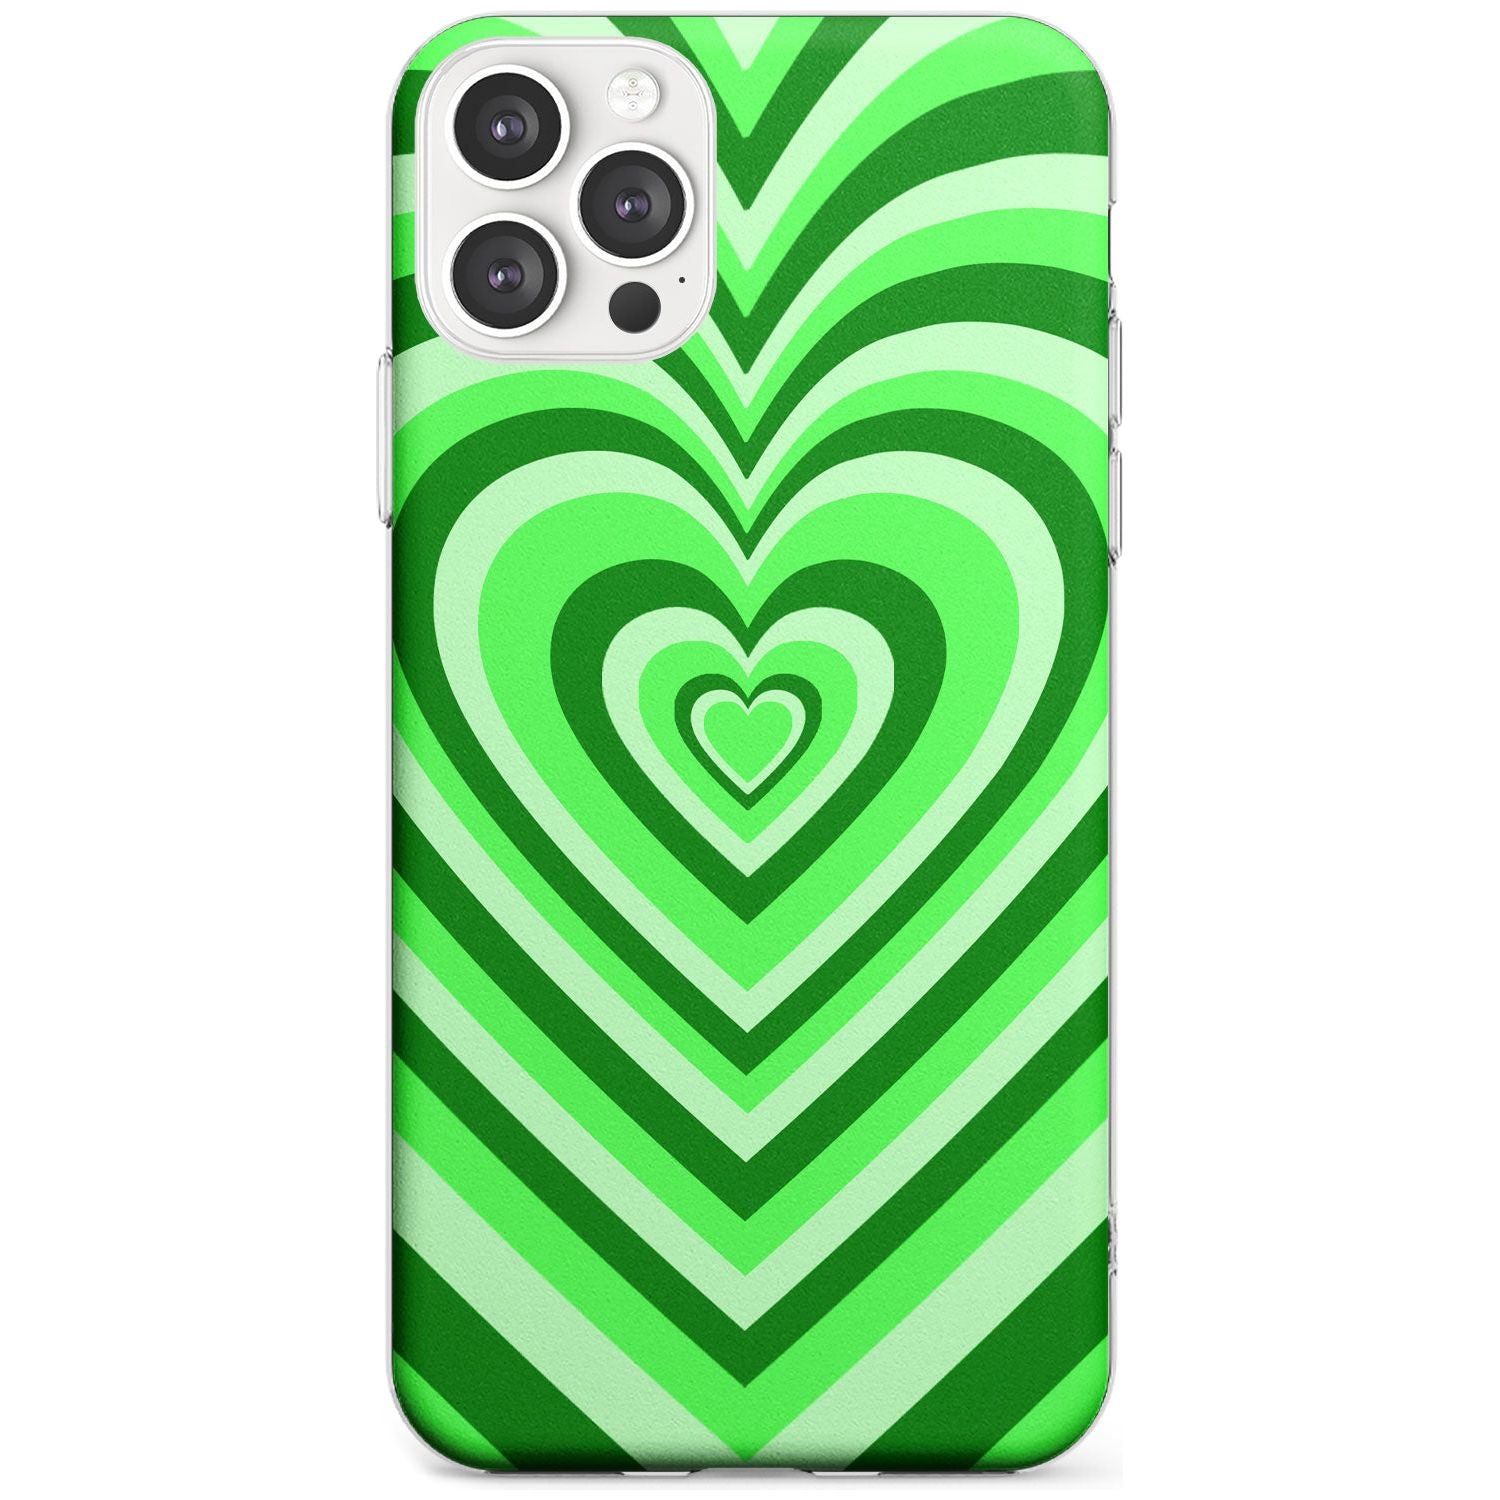 Green Heart Illusion Slim TPU Phone Case for iPhone 11 Pro Max